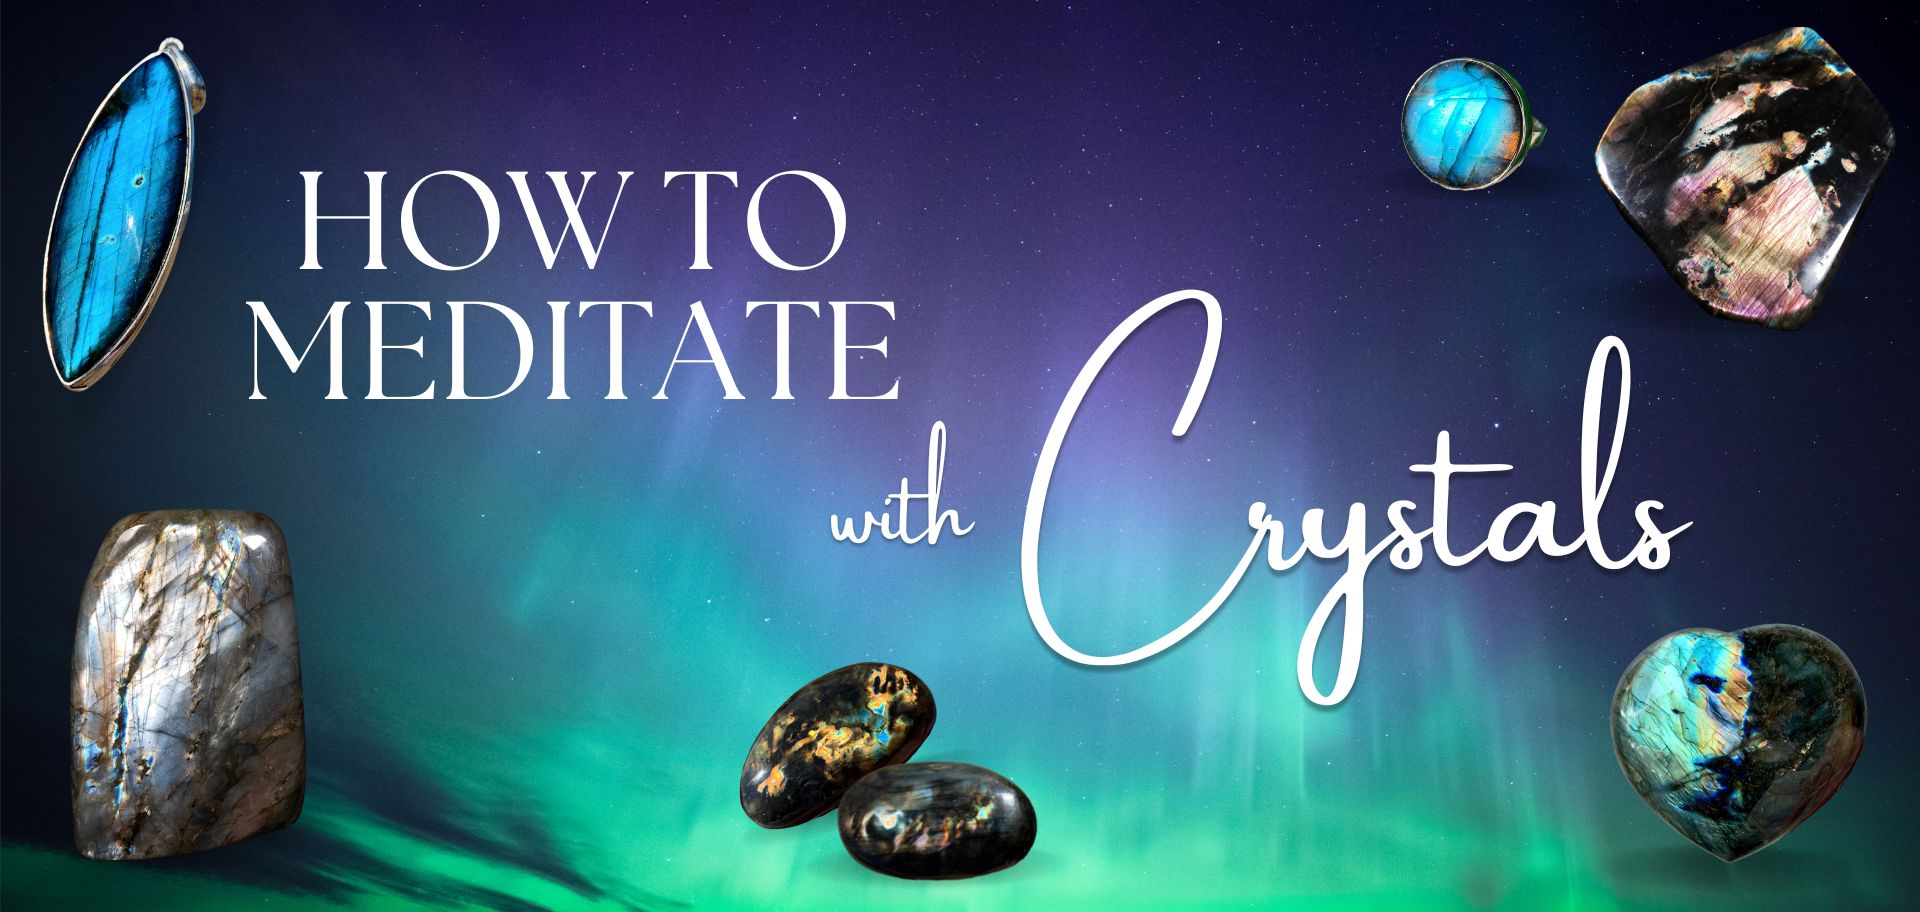 How To Meditate with Crystals